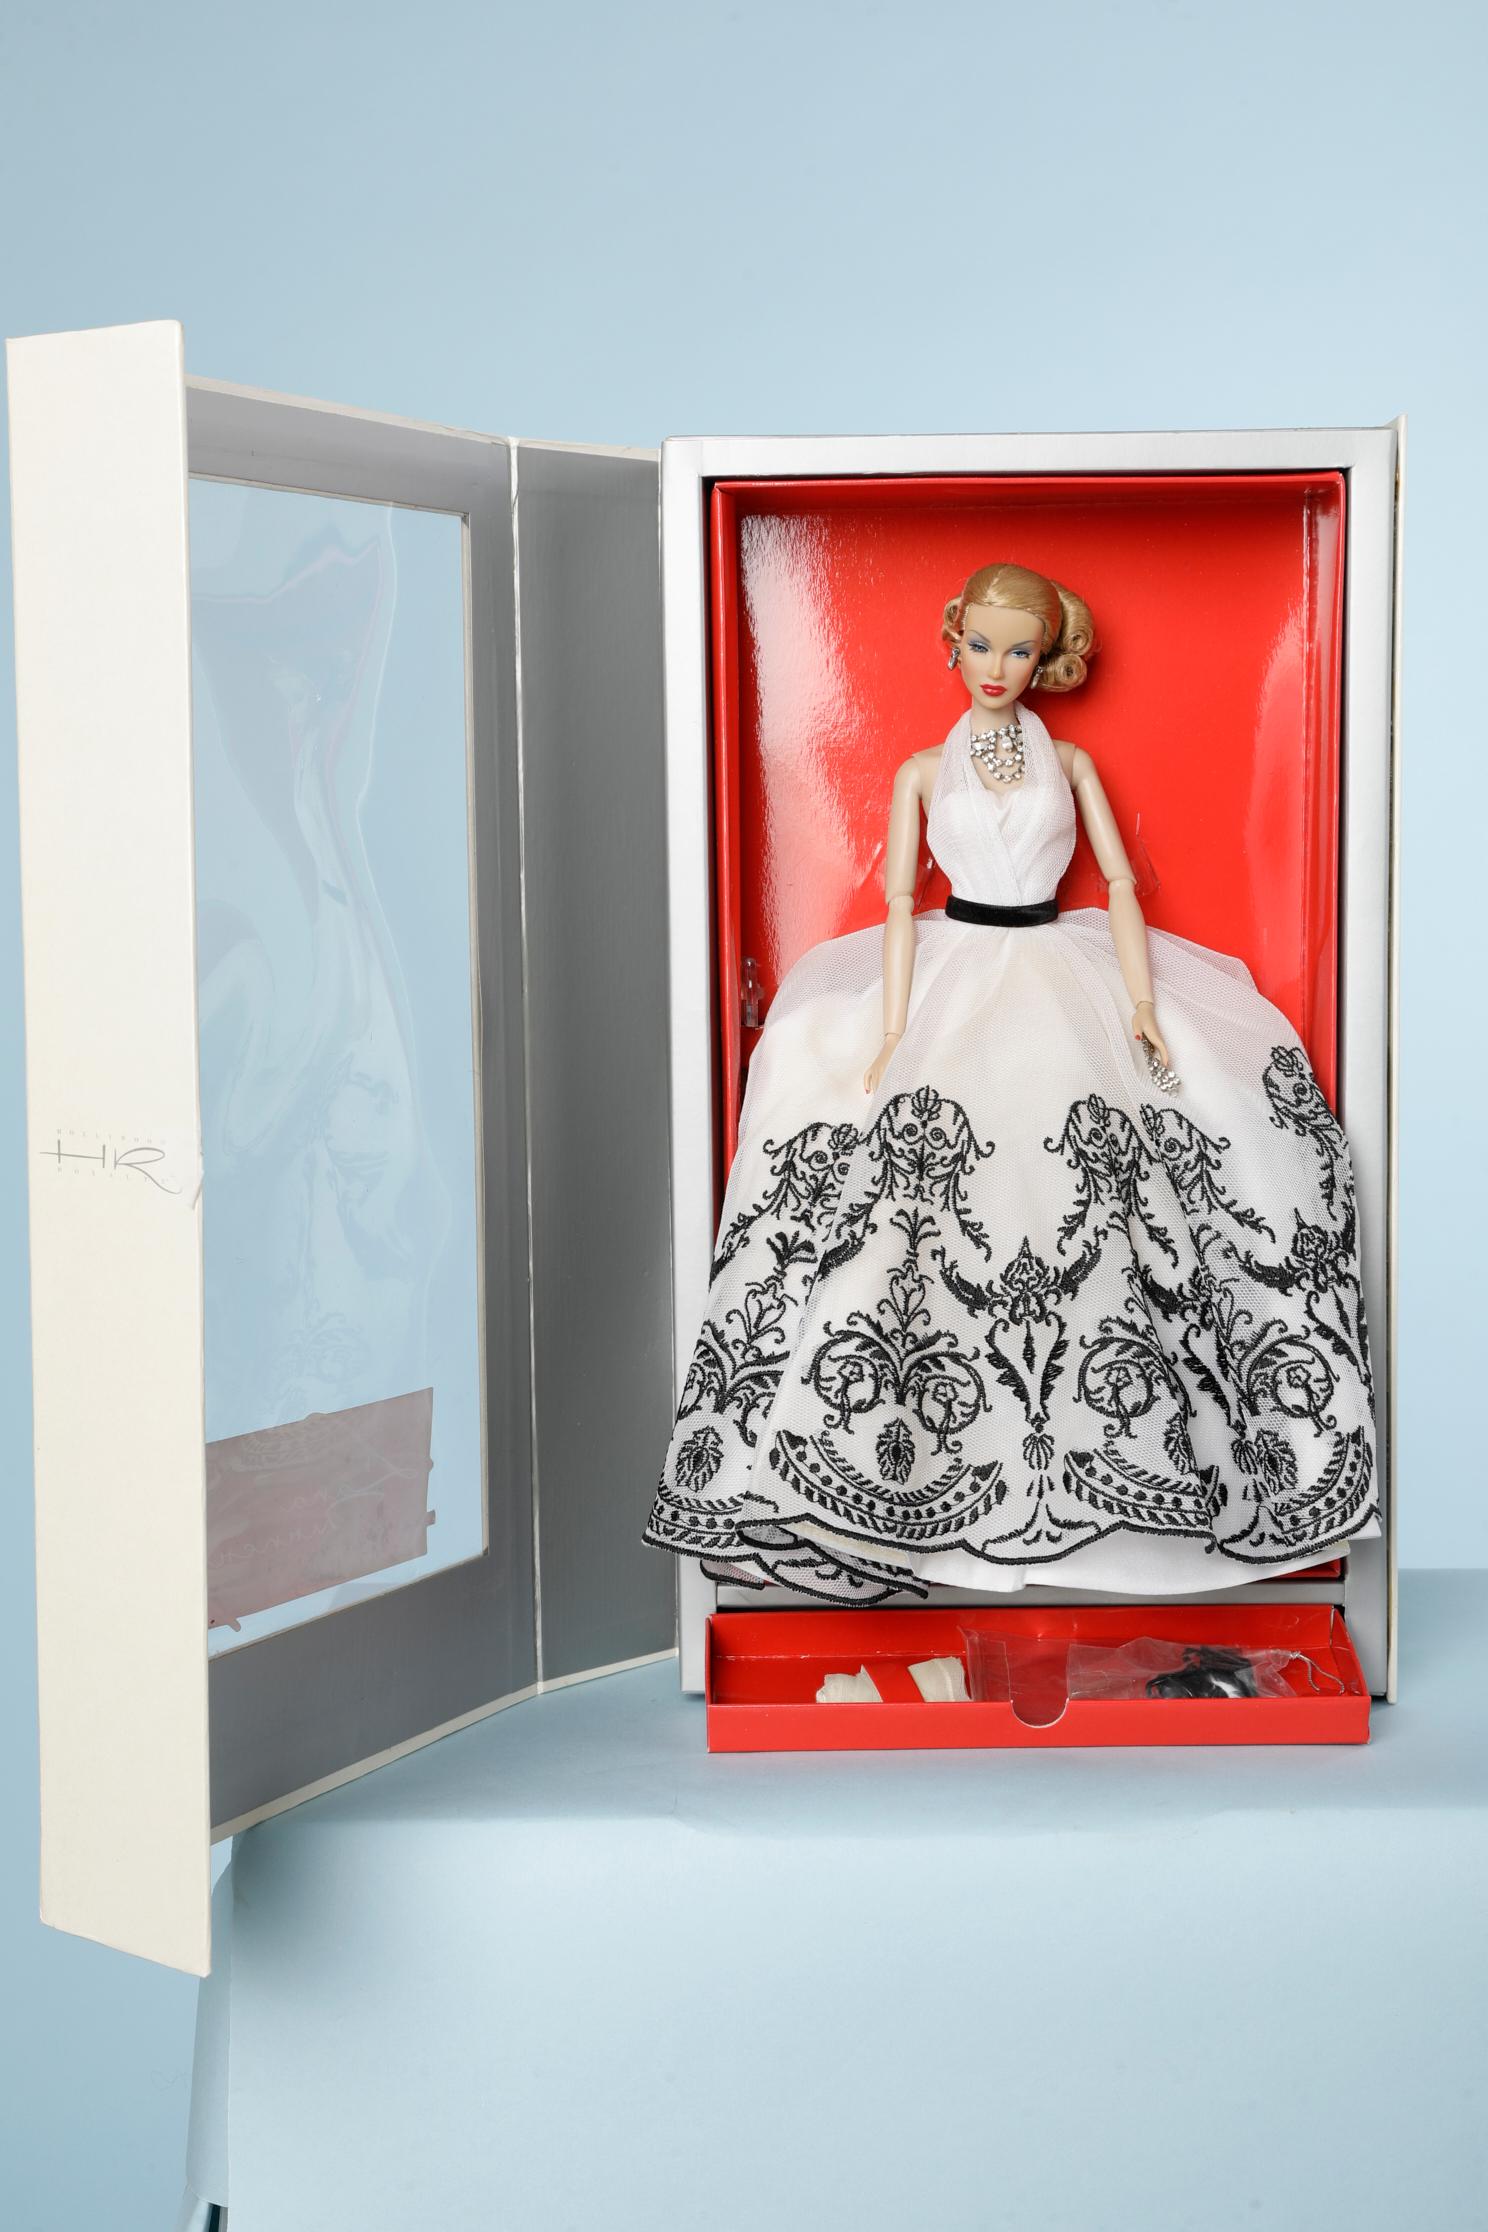 The Lana Turner doll / Hollywood Royalty
Certificate of authenticity.
Doll design by Jason Wu.
Size: 31,75cm = 12,5 inches